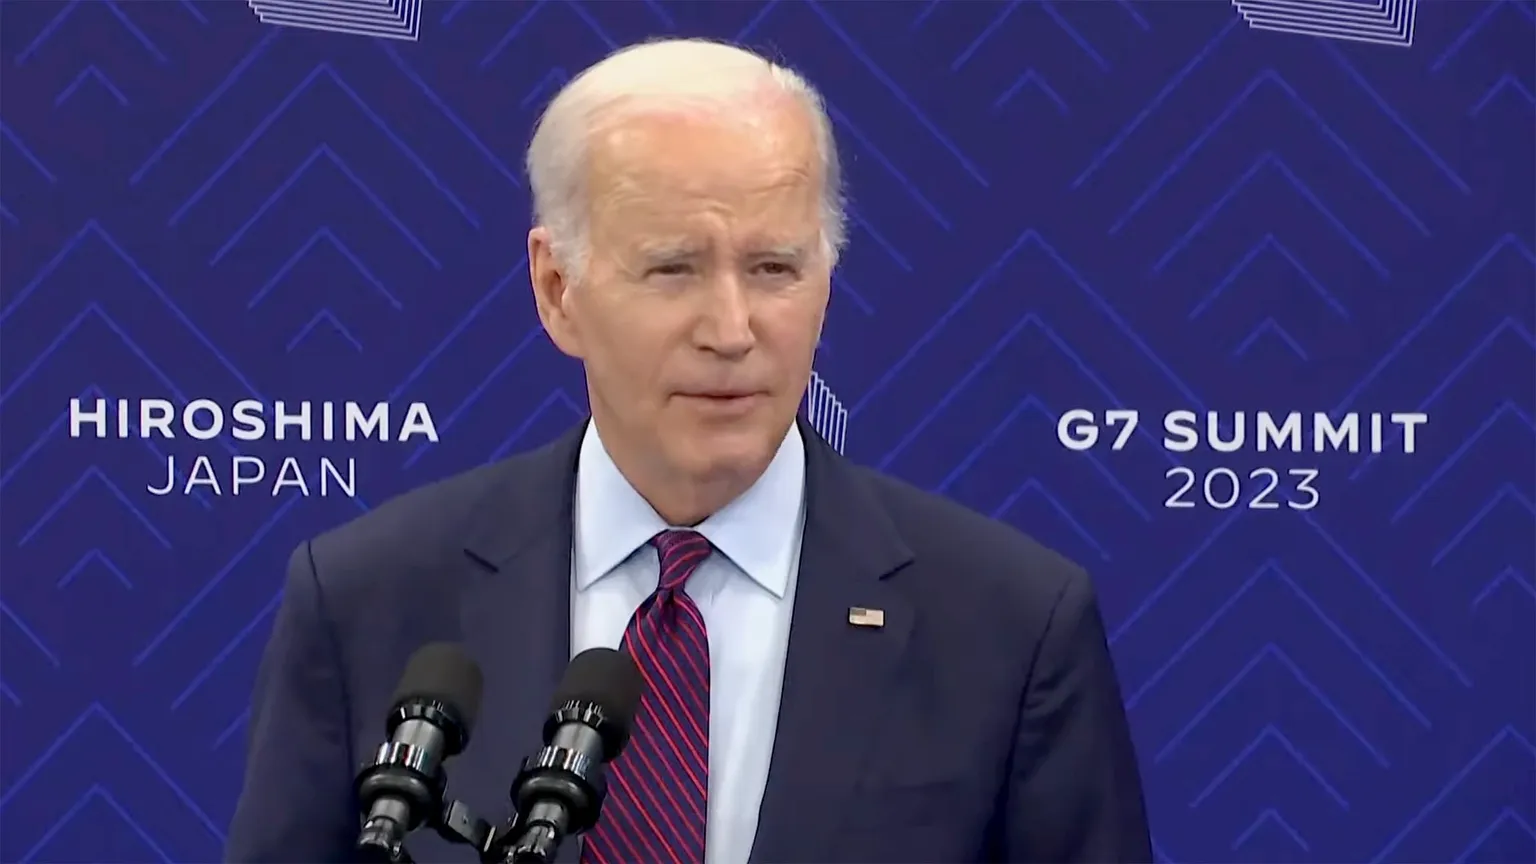 U.S. President Joe Biden at the 2023 Group of Seven (G7) conference in Japan. Image: Sky News